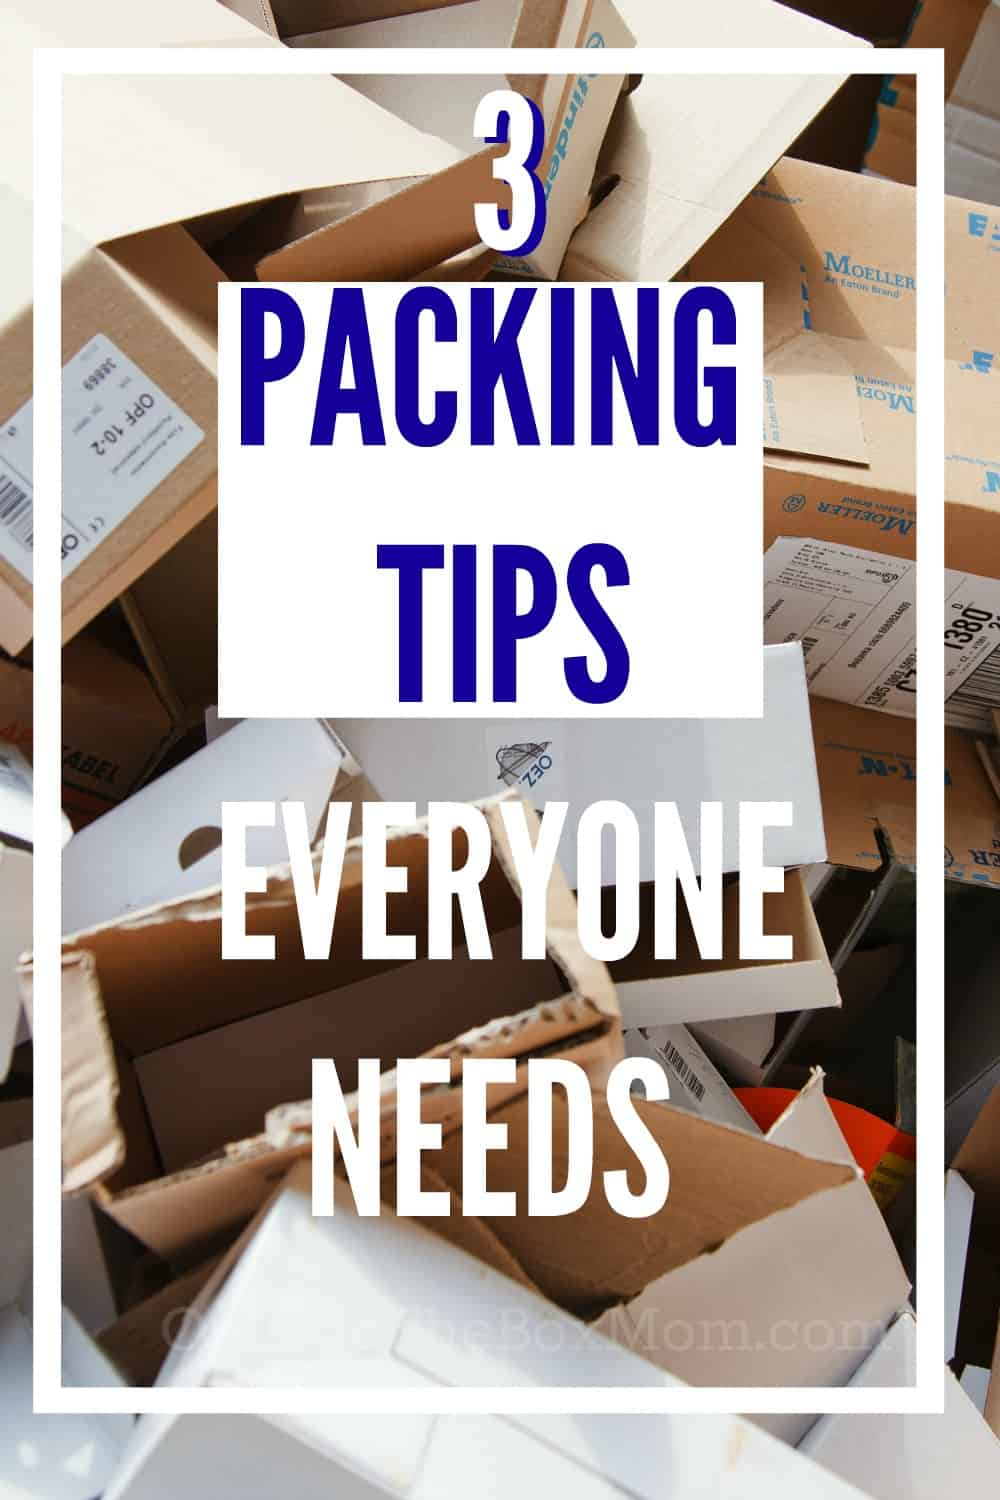 When it comes to your next move, does your checklist include the three most important packing tips?